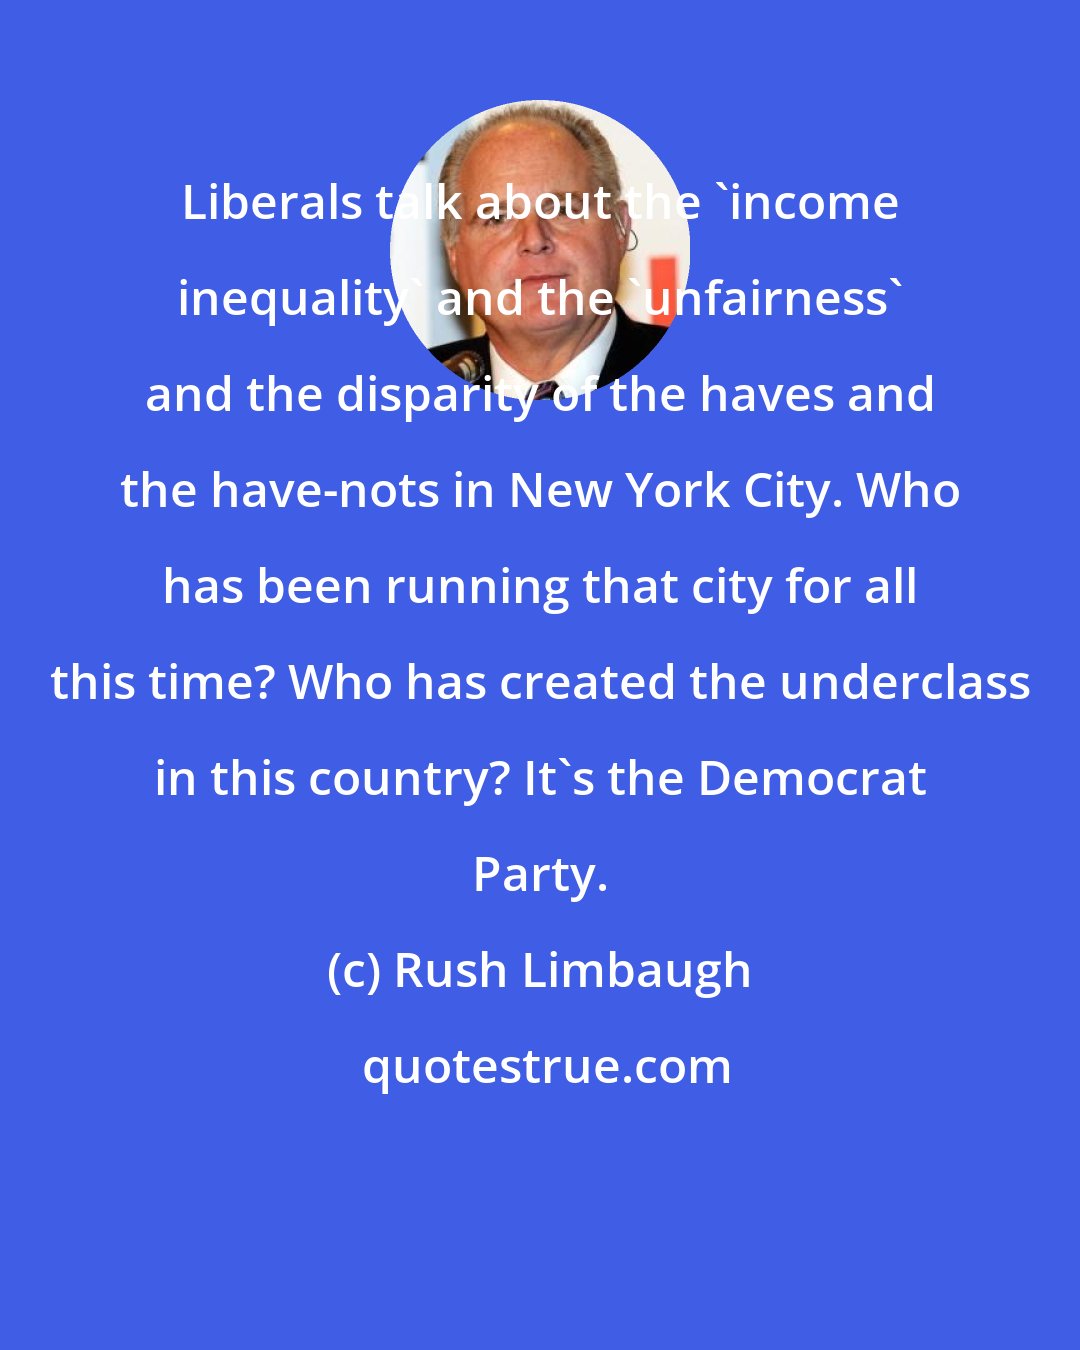 Rush Limbaugh: Liberals talk about the 'income inequality' and the 'unfairness' and the disparity of the haves and the have-nots in New York City. Who has been running that city for all this time? Who has created the underclass in this country? It's the Democrat Party.